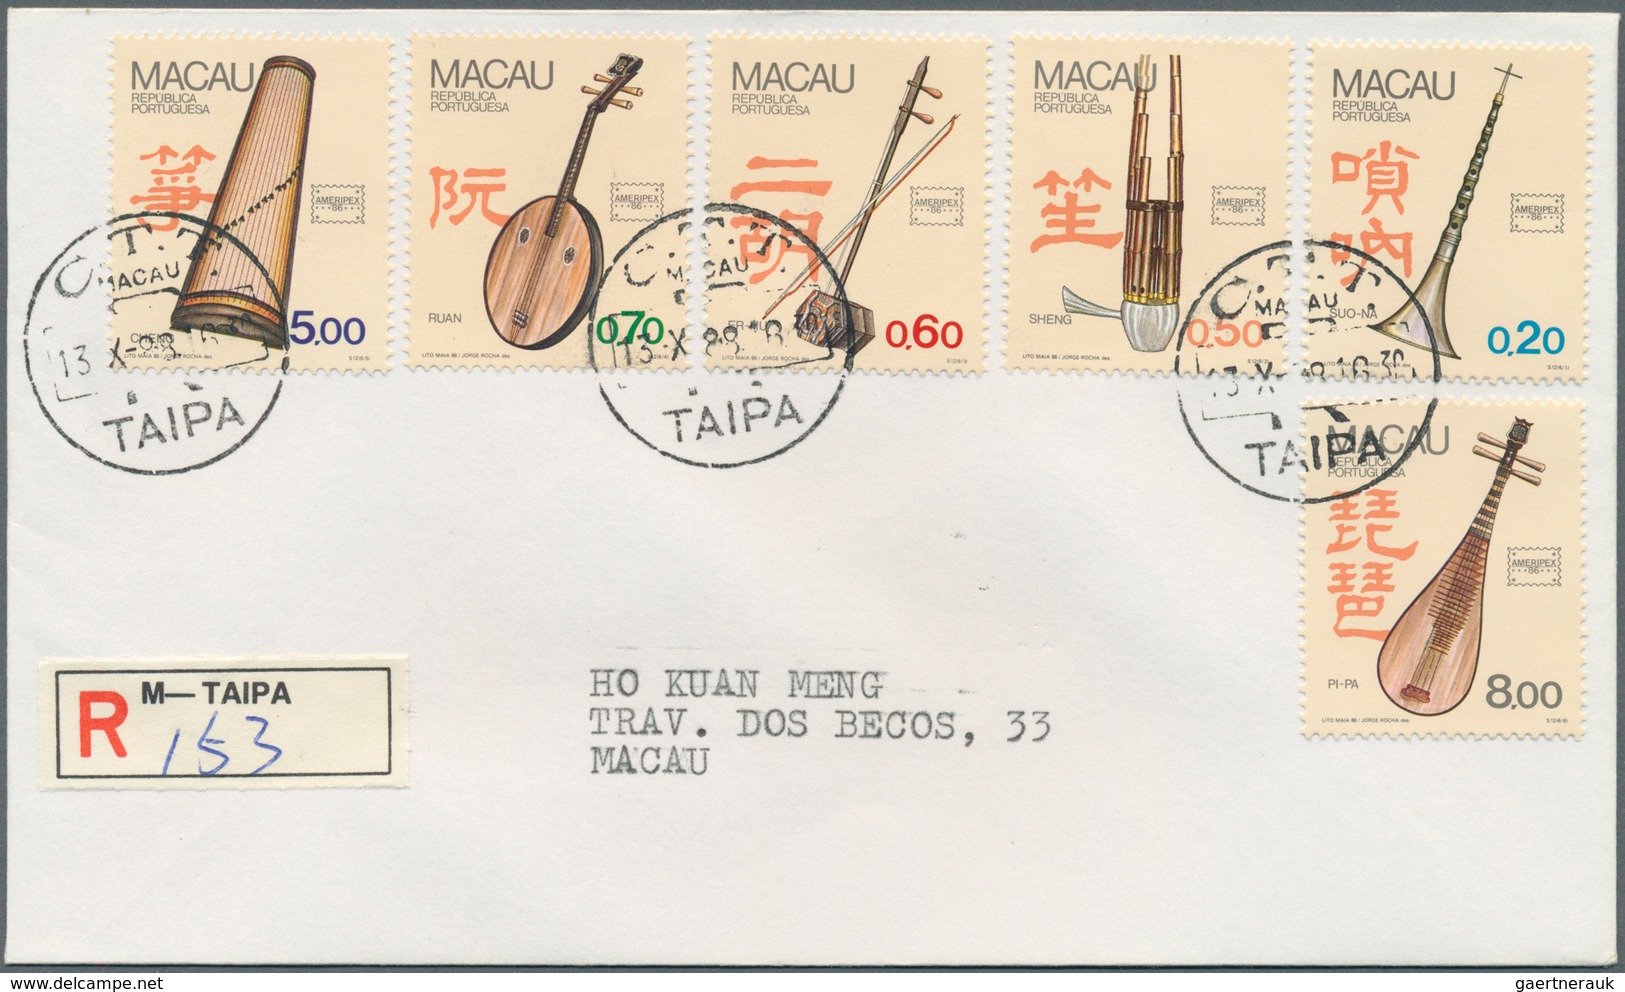 23508 Macau: 1976/88 complete, each set or single issue on registered local covers (53) used "TAIPA" in 19